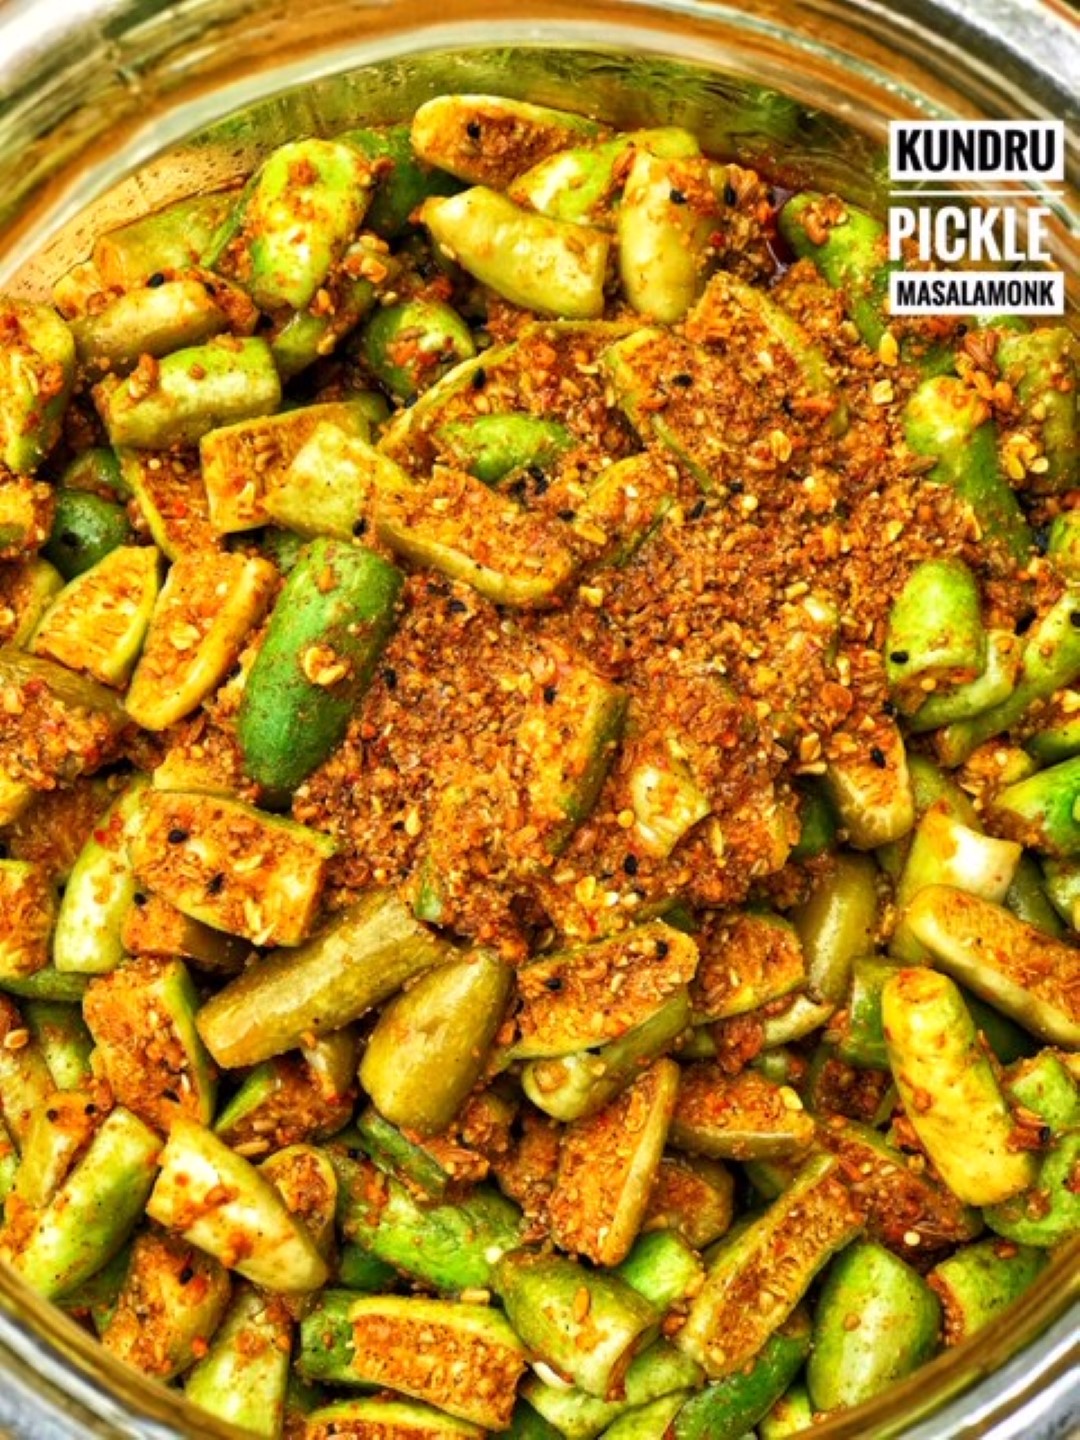 The mouth watering tendli pickle tastes great with chapatis, rice or as a side dish with meals